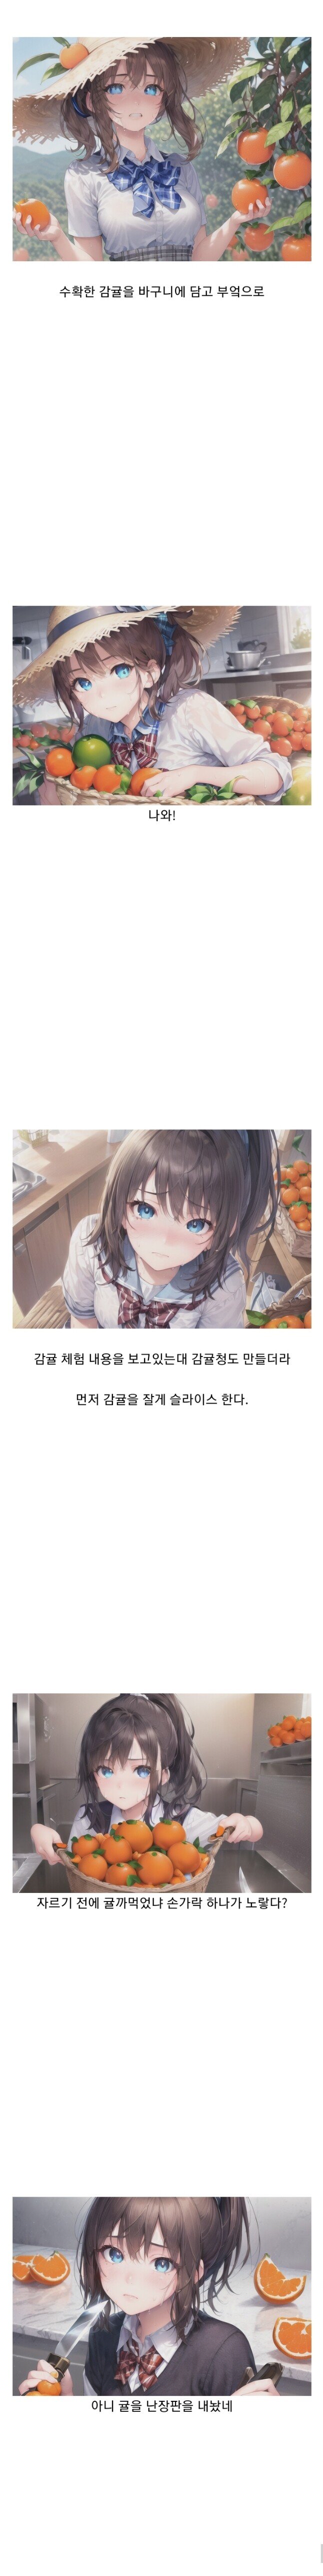 Draw a girl who eats tangerines, ai